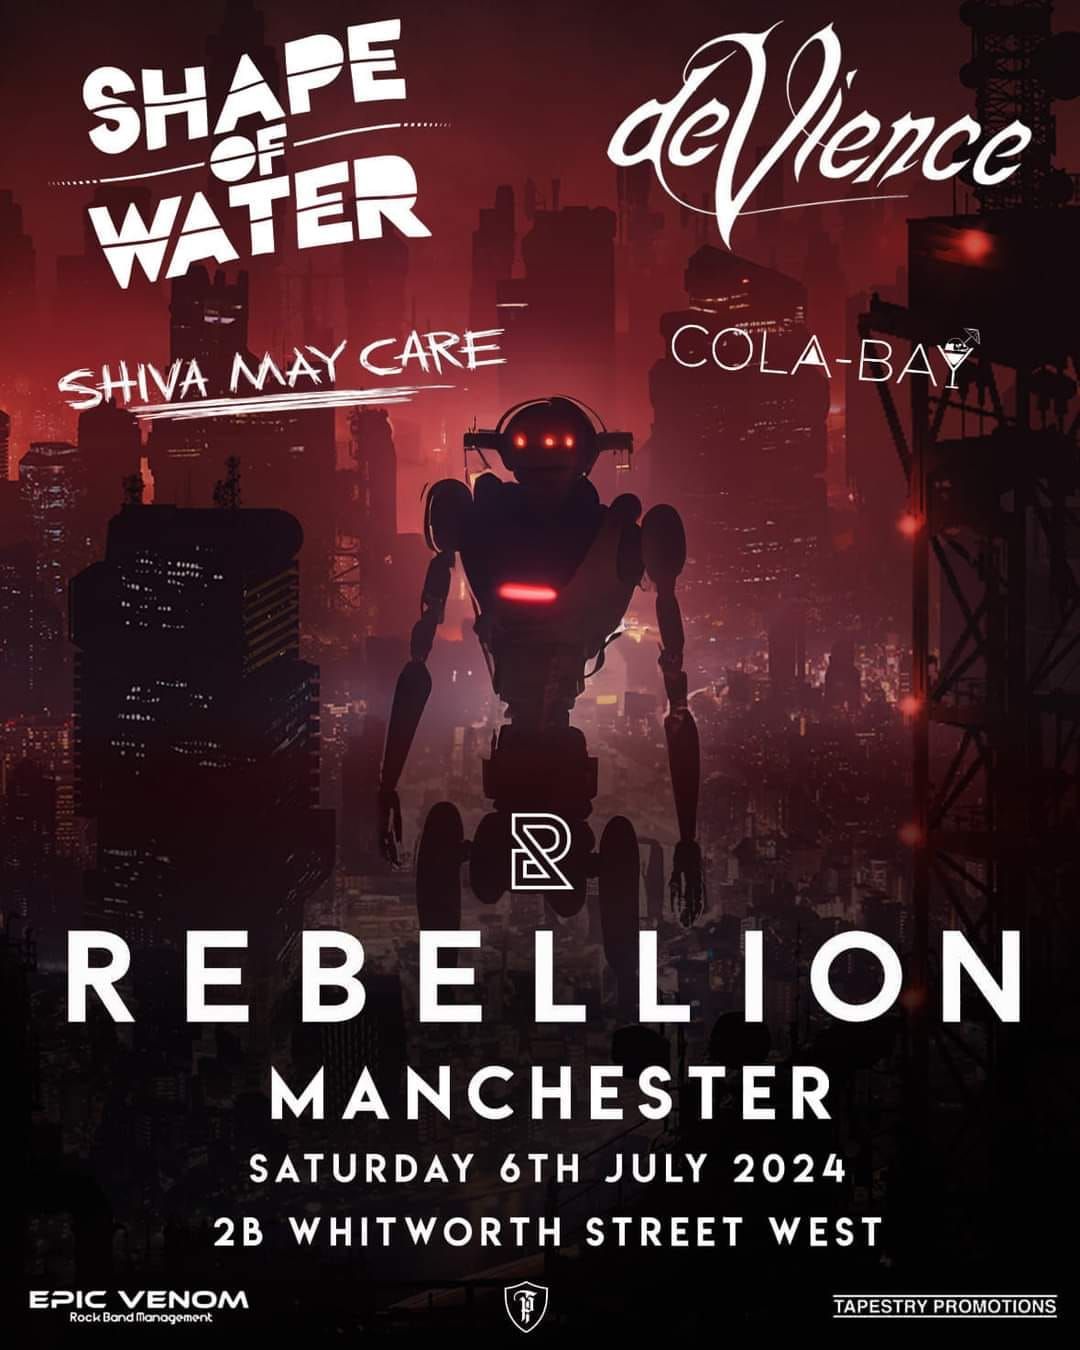 Shape Of Water + deVience + Shiva May Care + Cola Bay - Manchester